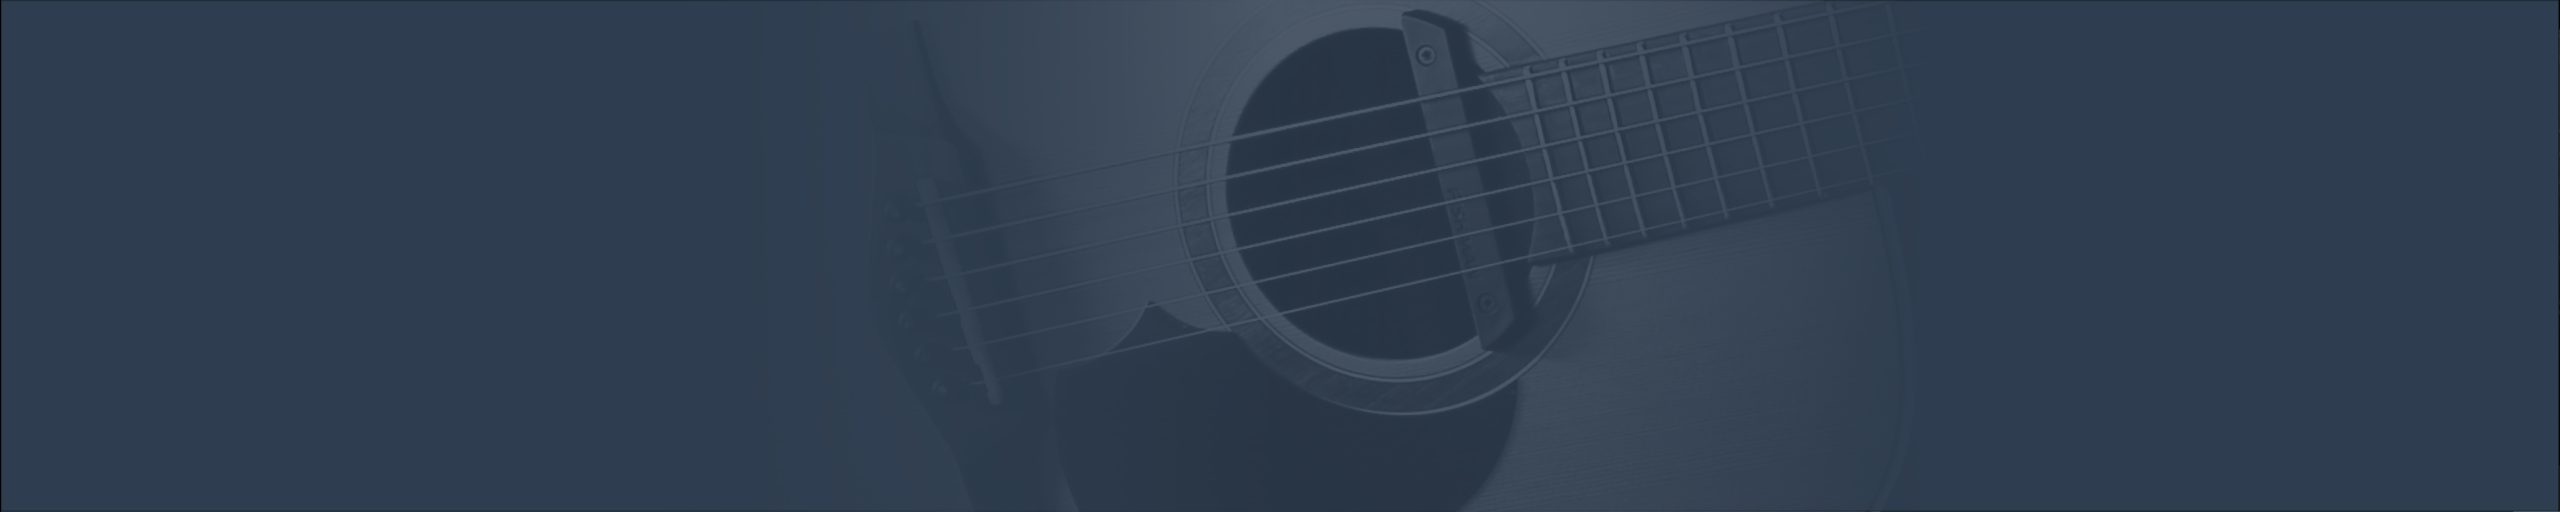 Acoustic Guitar Tuning